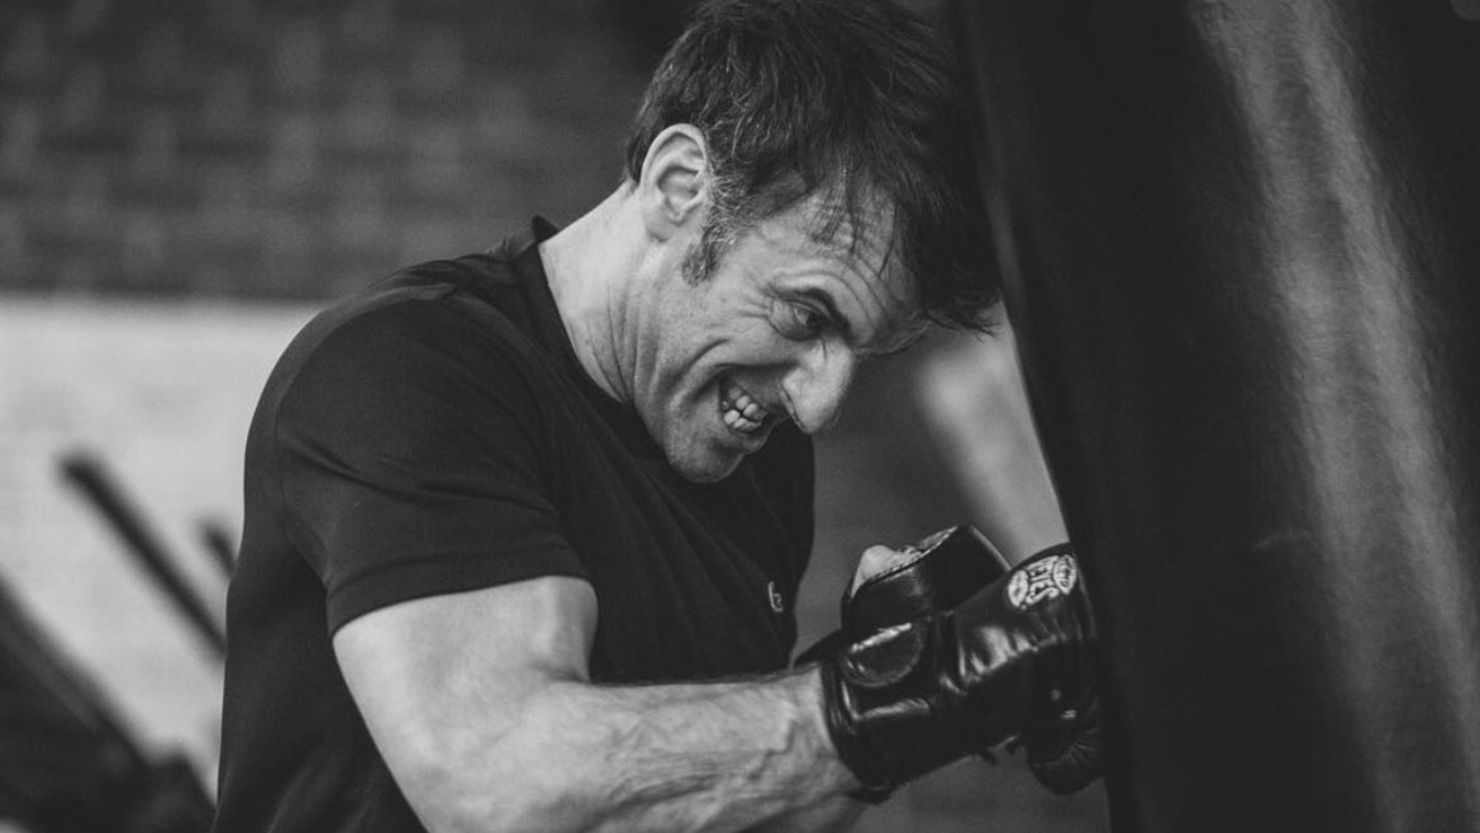 French President Emmanuel Macron pictured during a boxing session.